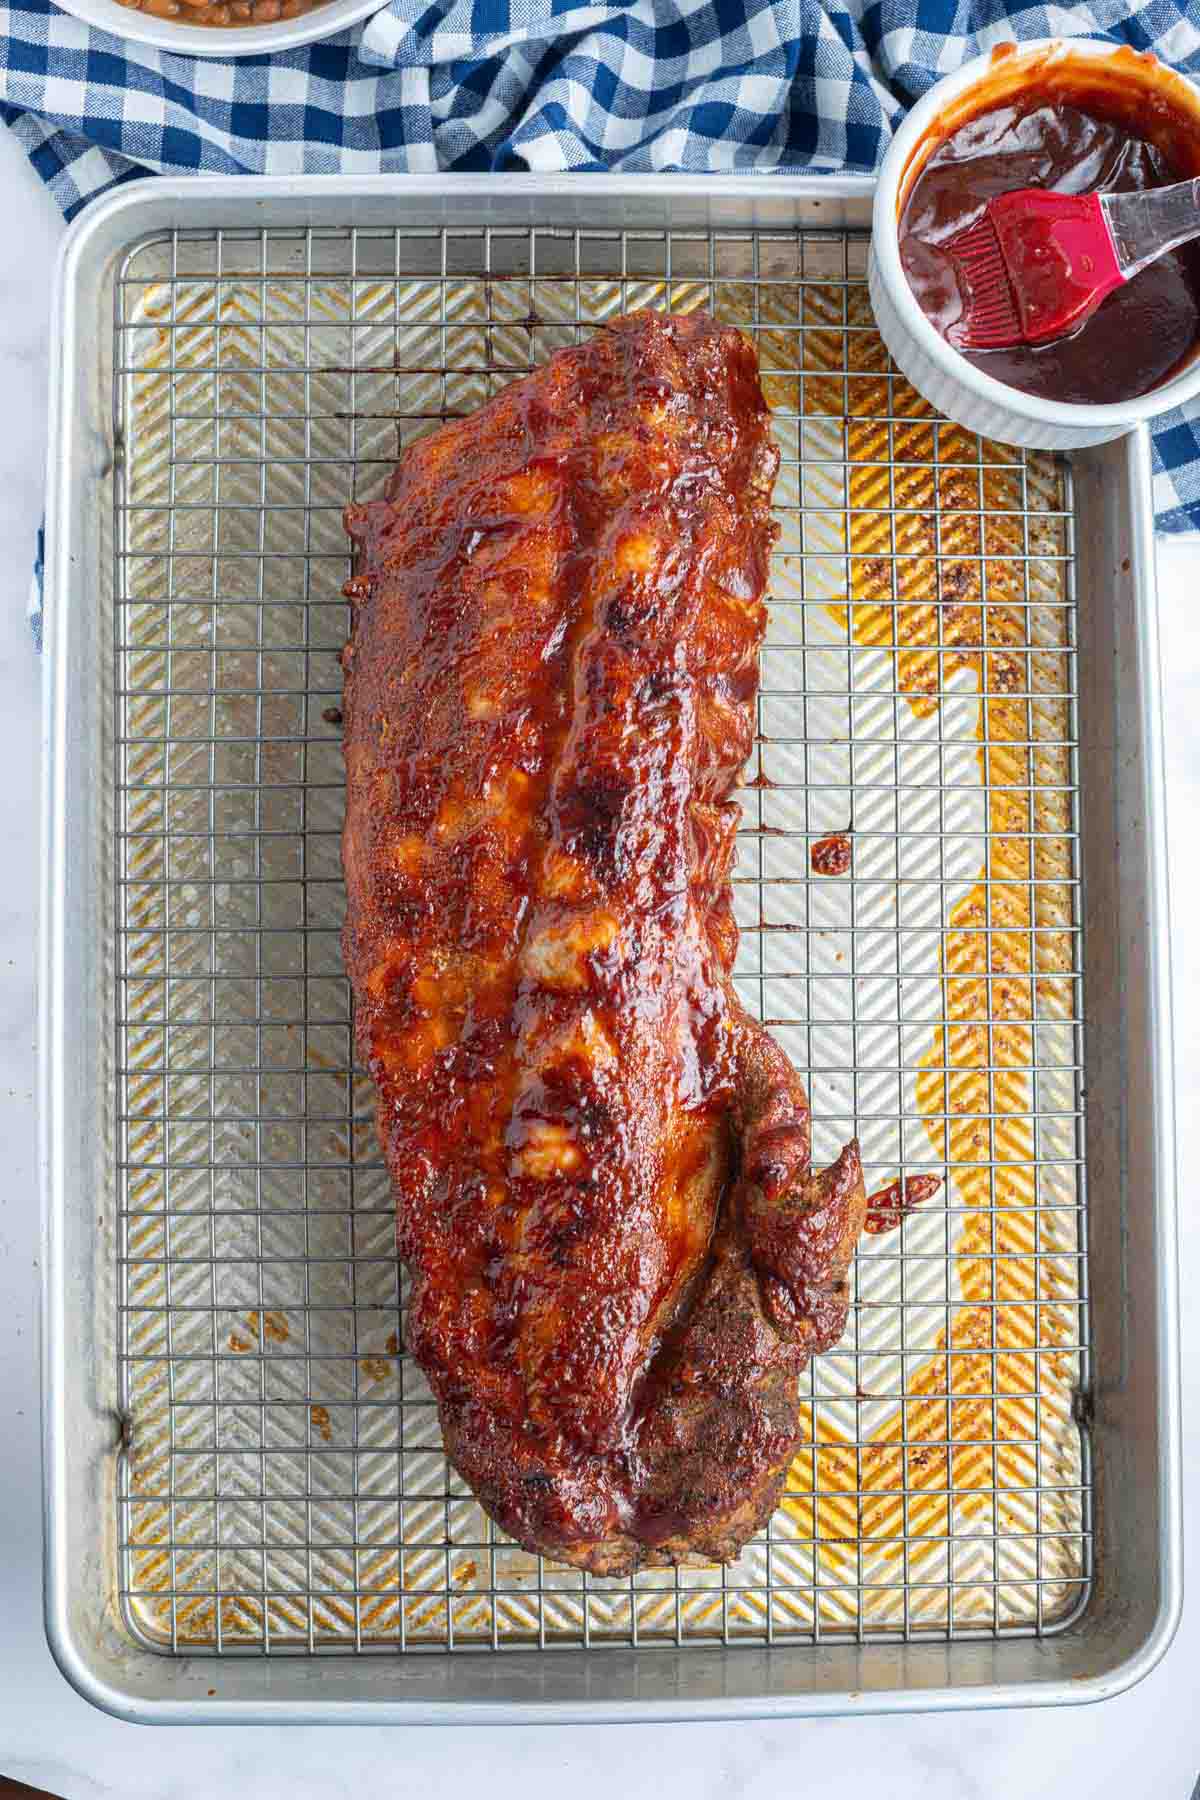 A cooked rack of ribs.